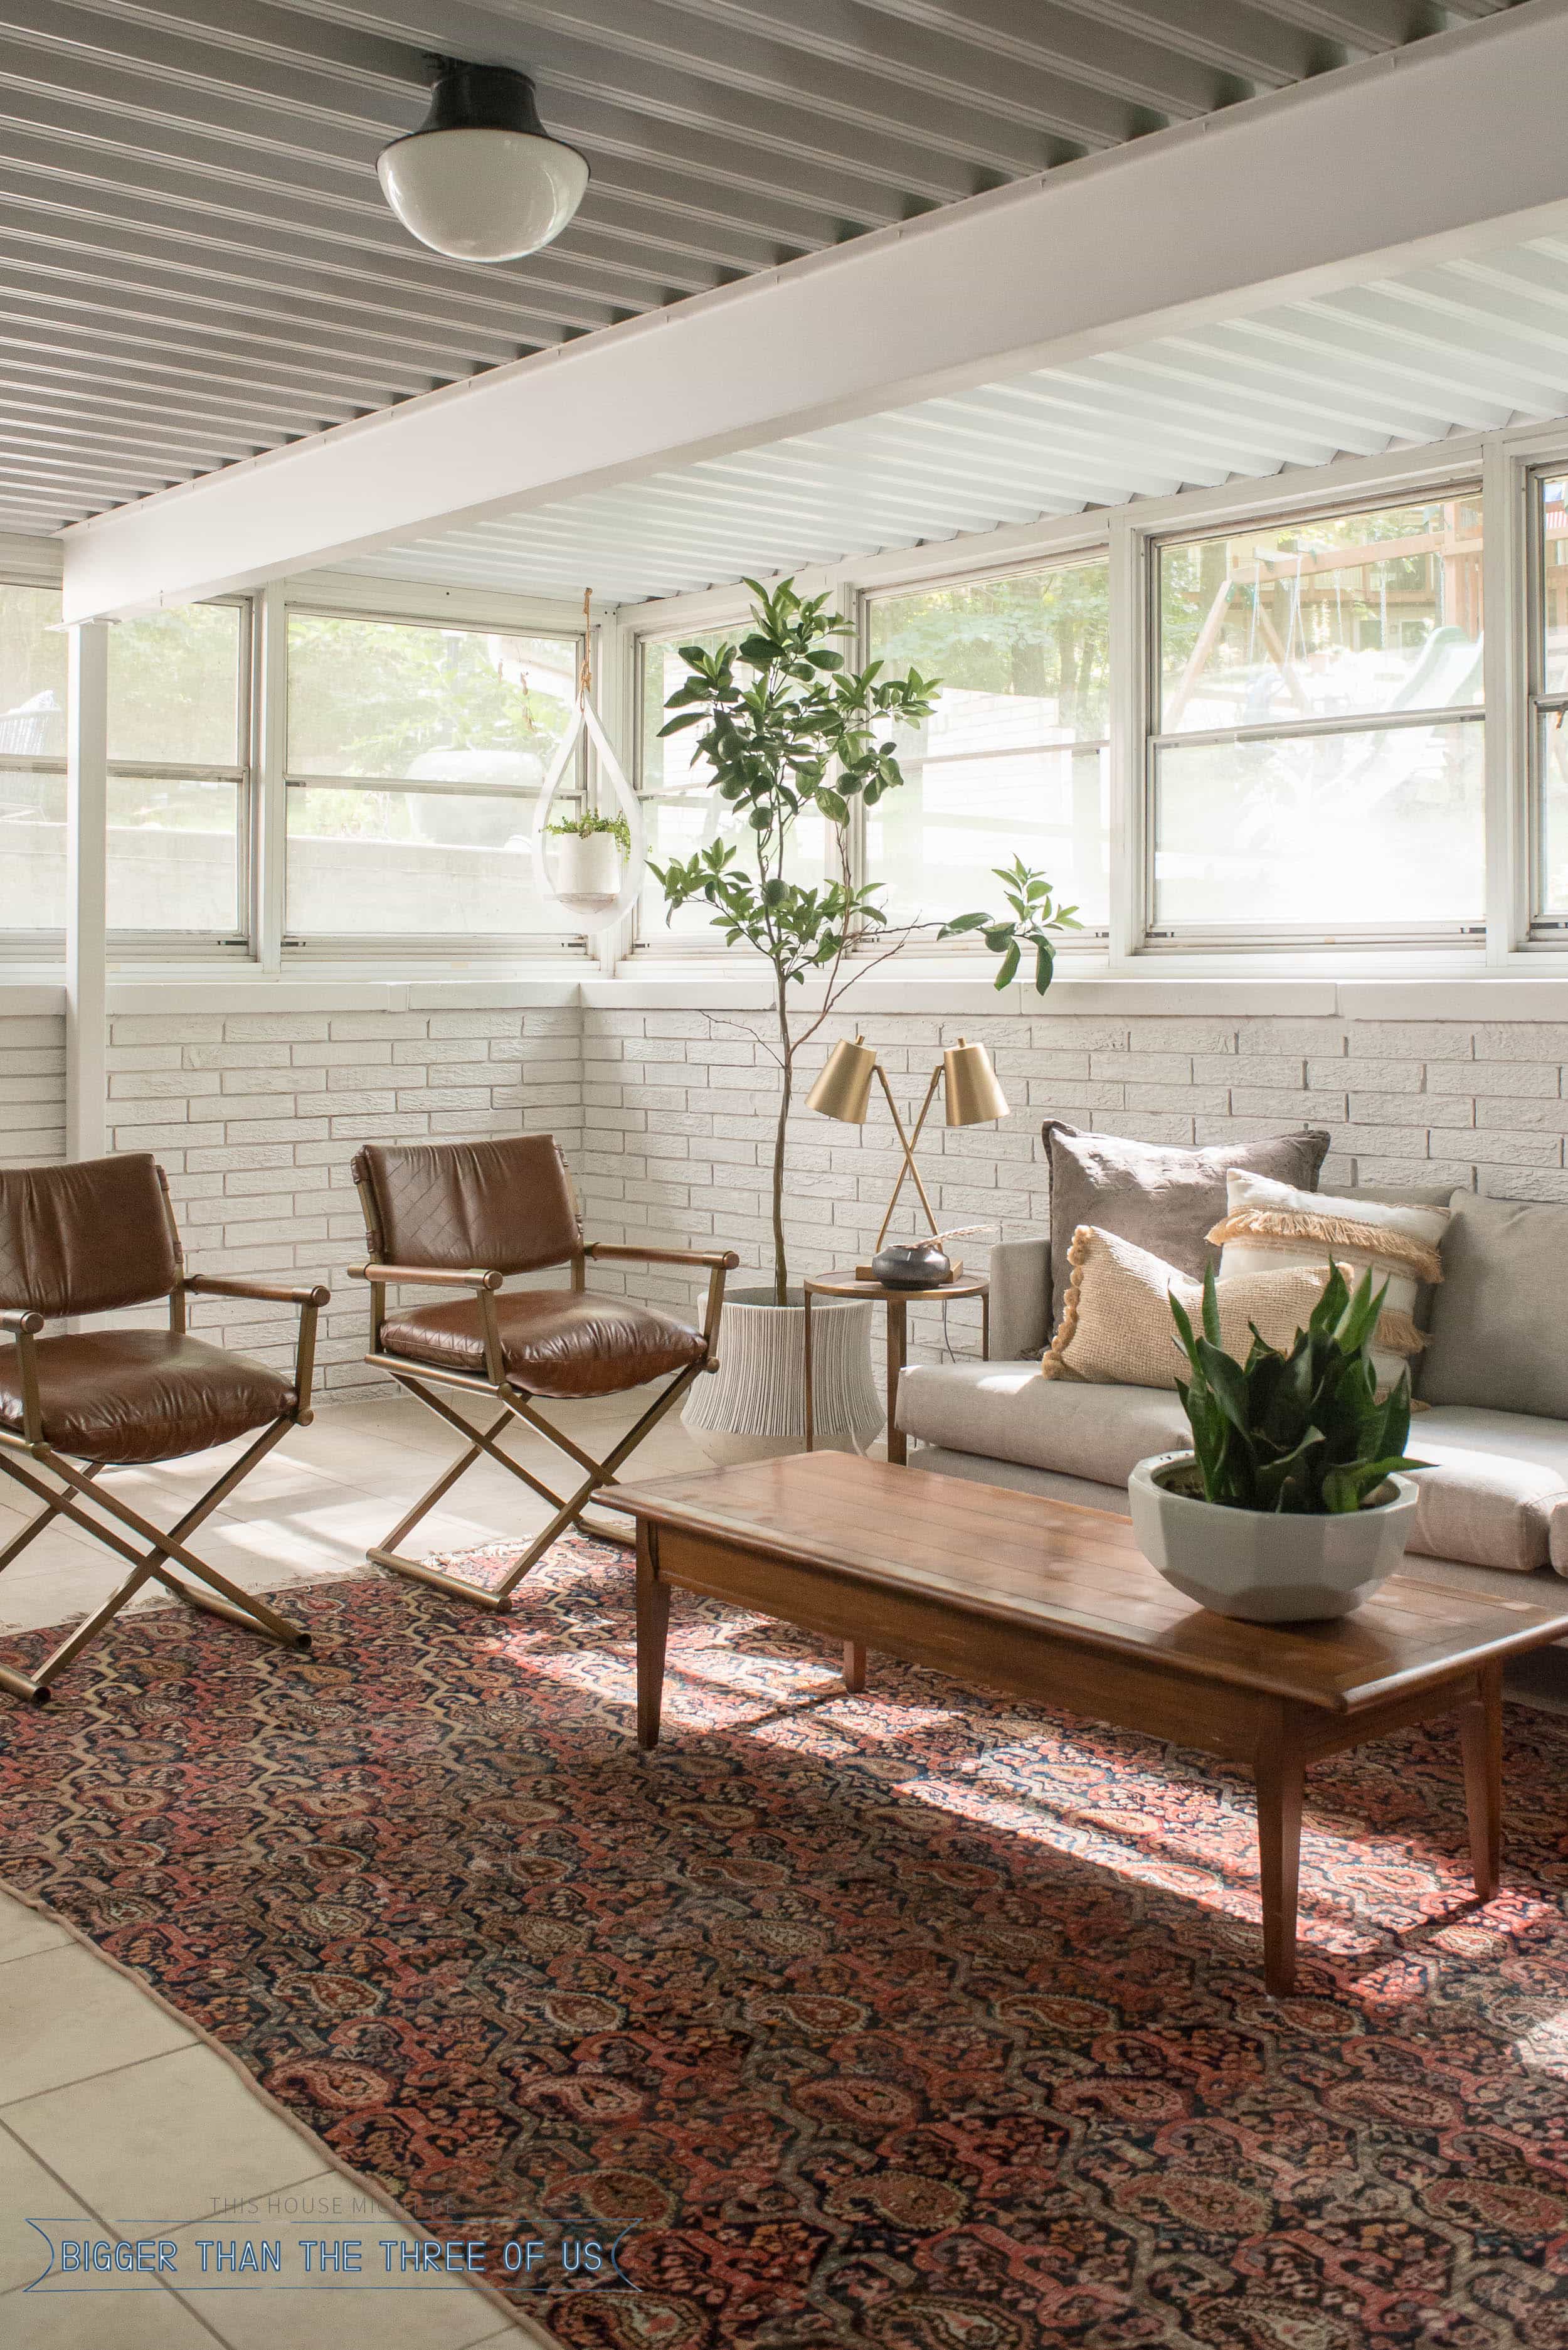 Sunroom Office at the back of the house with a vintage rug, seating space in sunroom and more!